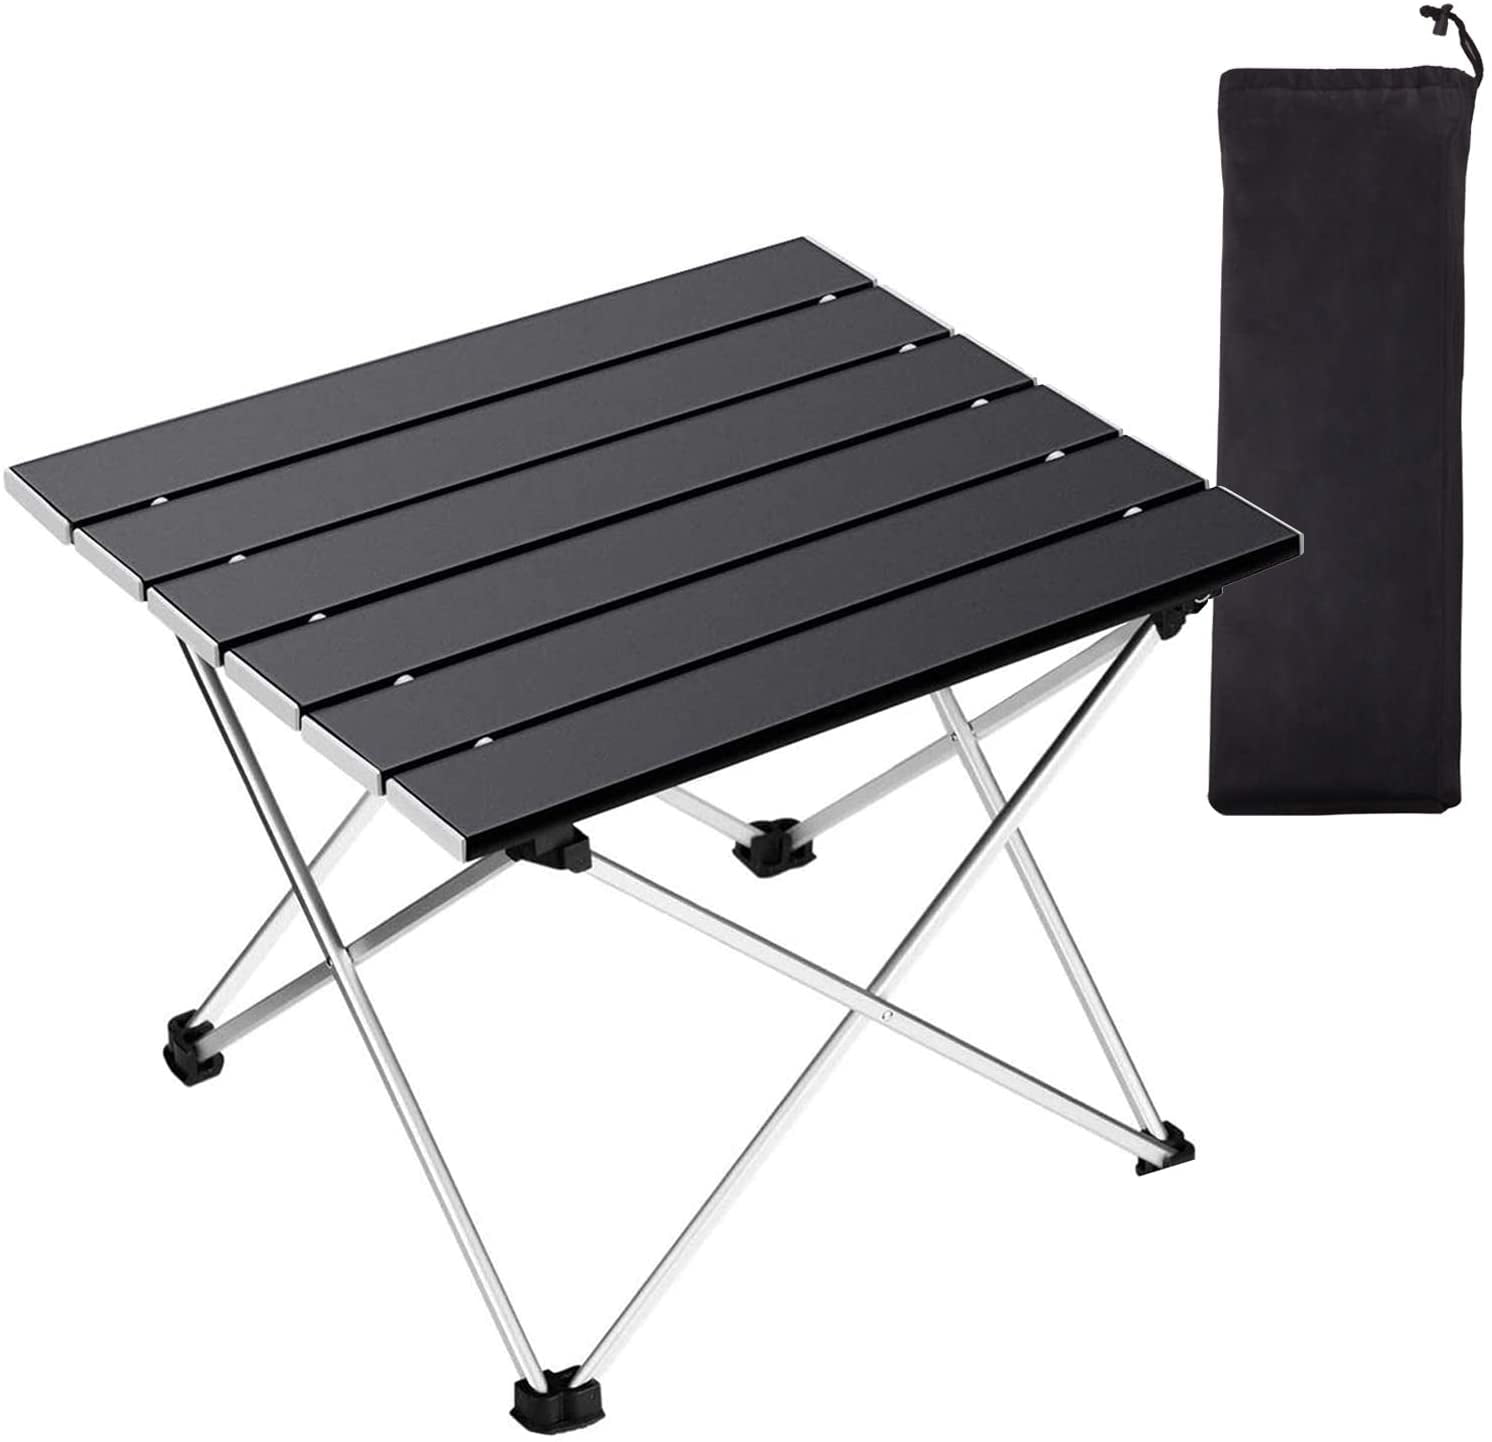 Portable Camping Table,Outdoor Lightweight Folding Table For BBQ,Hiking,Fishing 